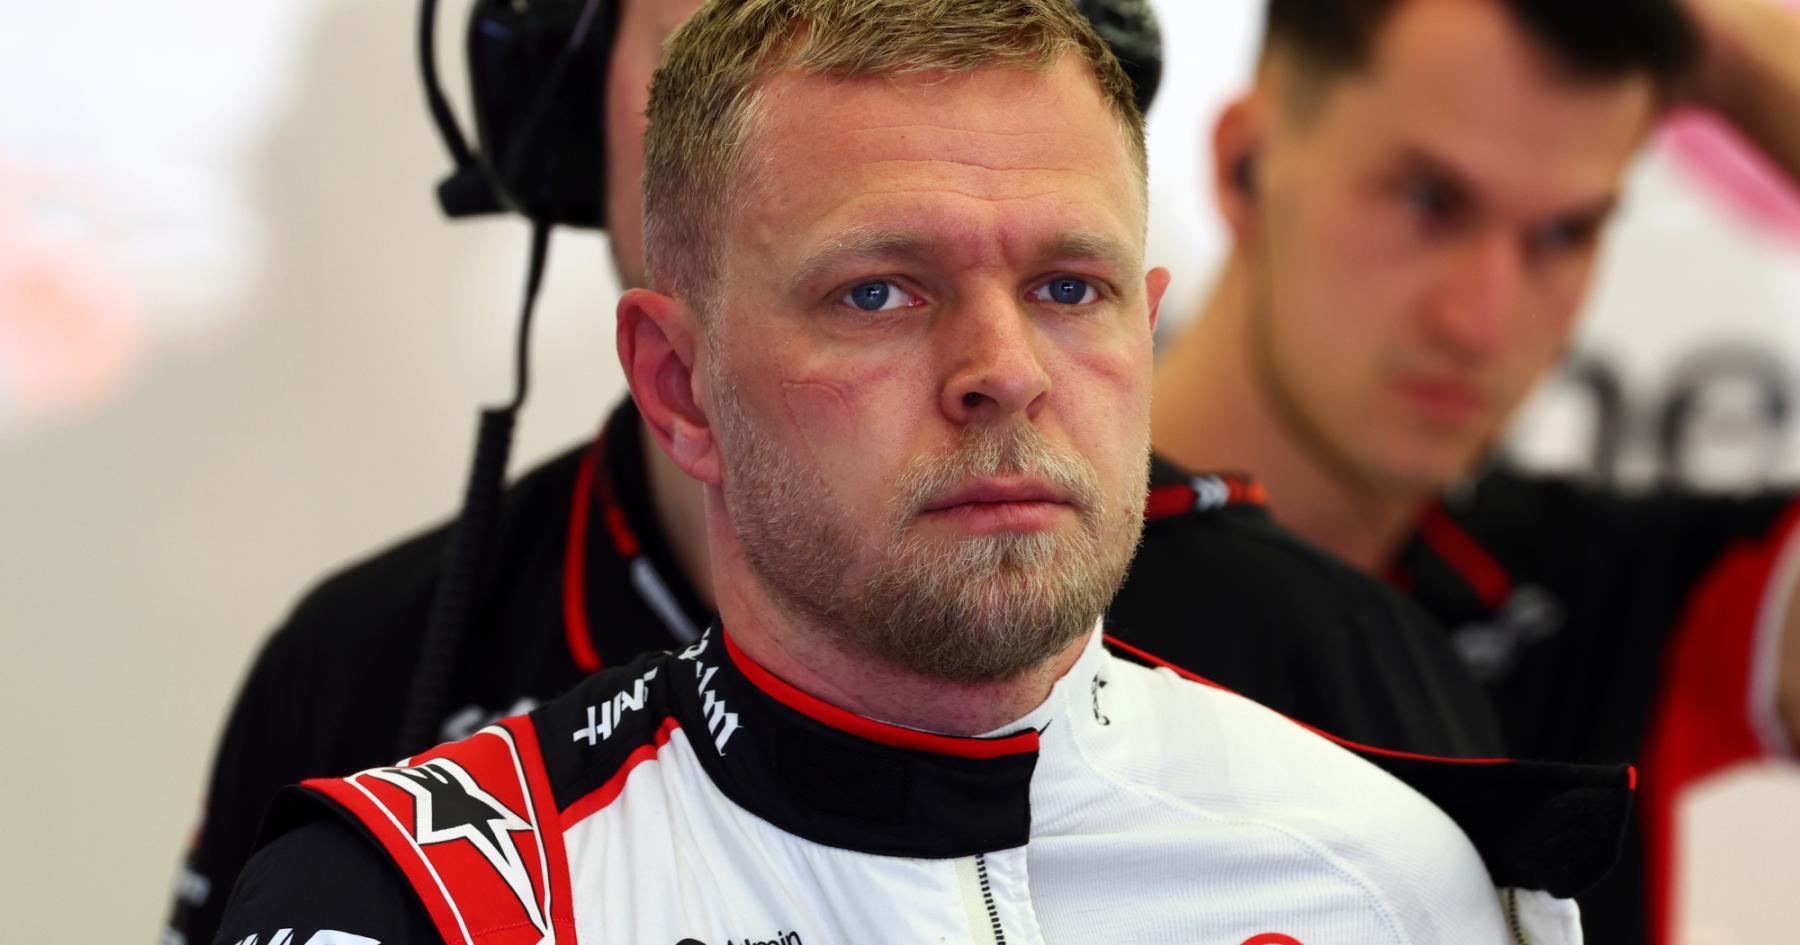 Kevin Magnussen Ready to Set the Pace with Haas F1 for the Long Haul